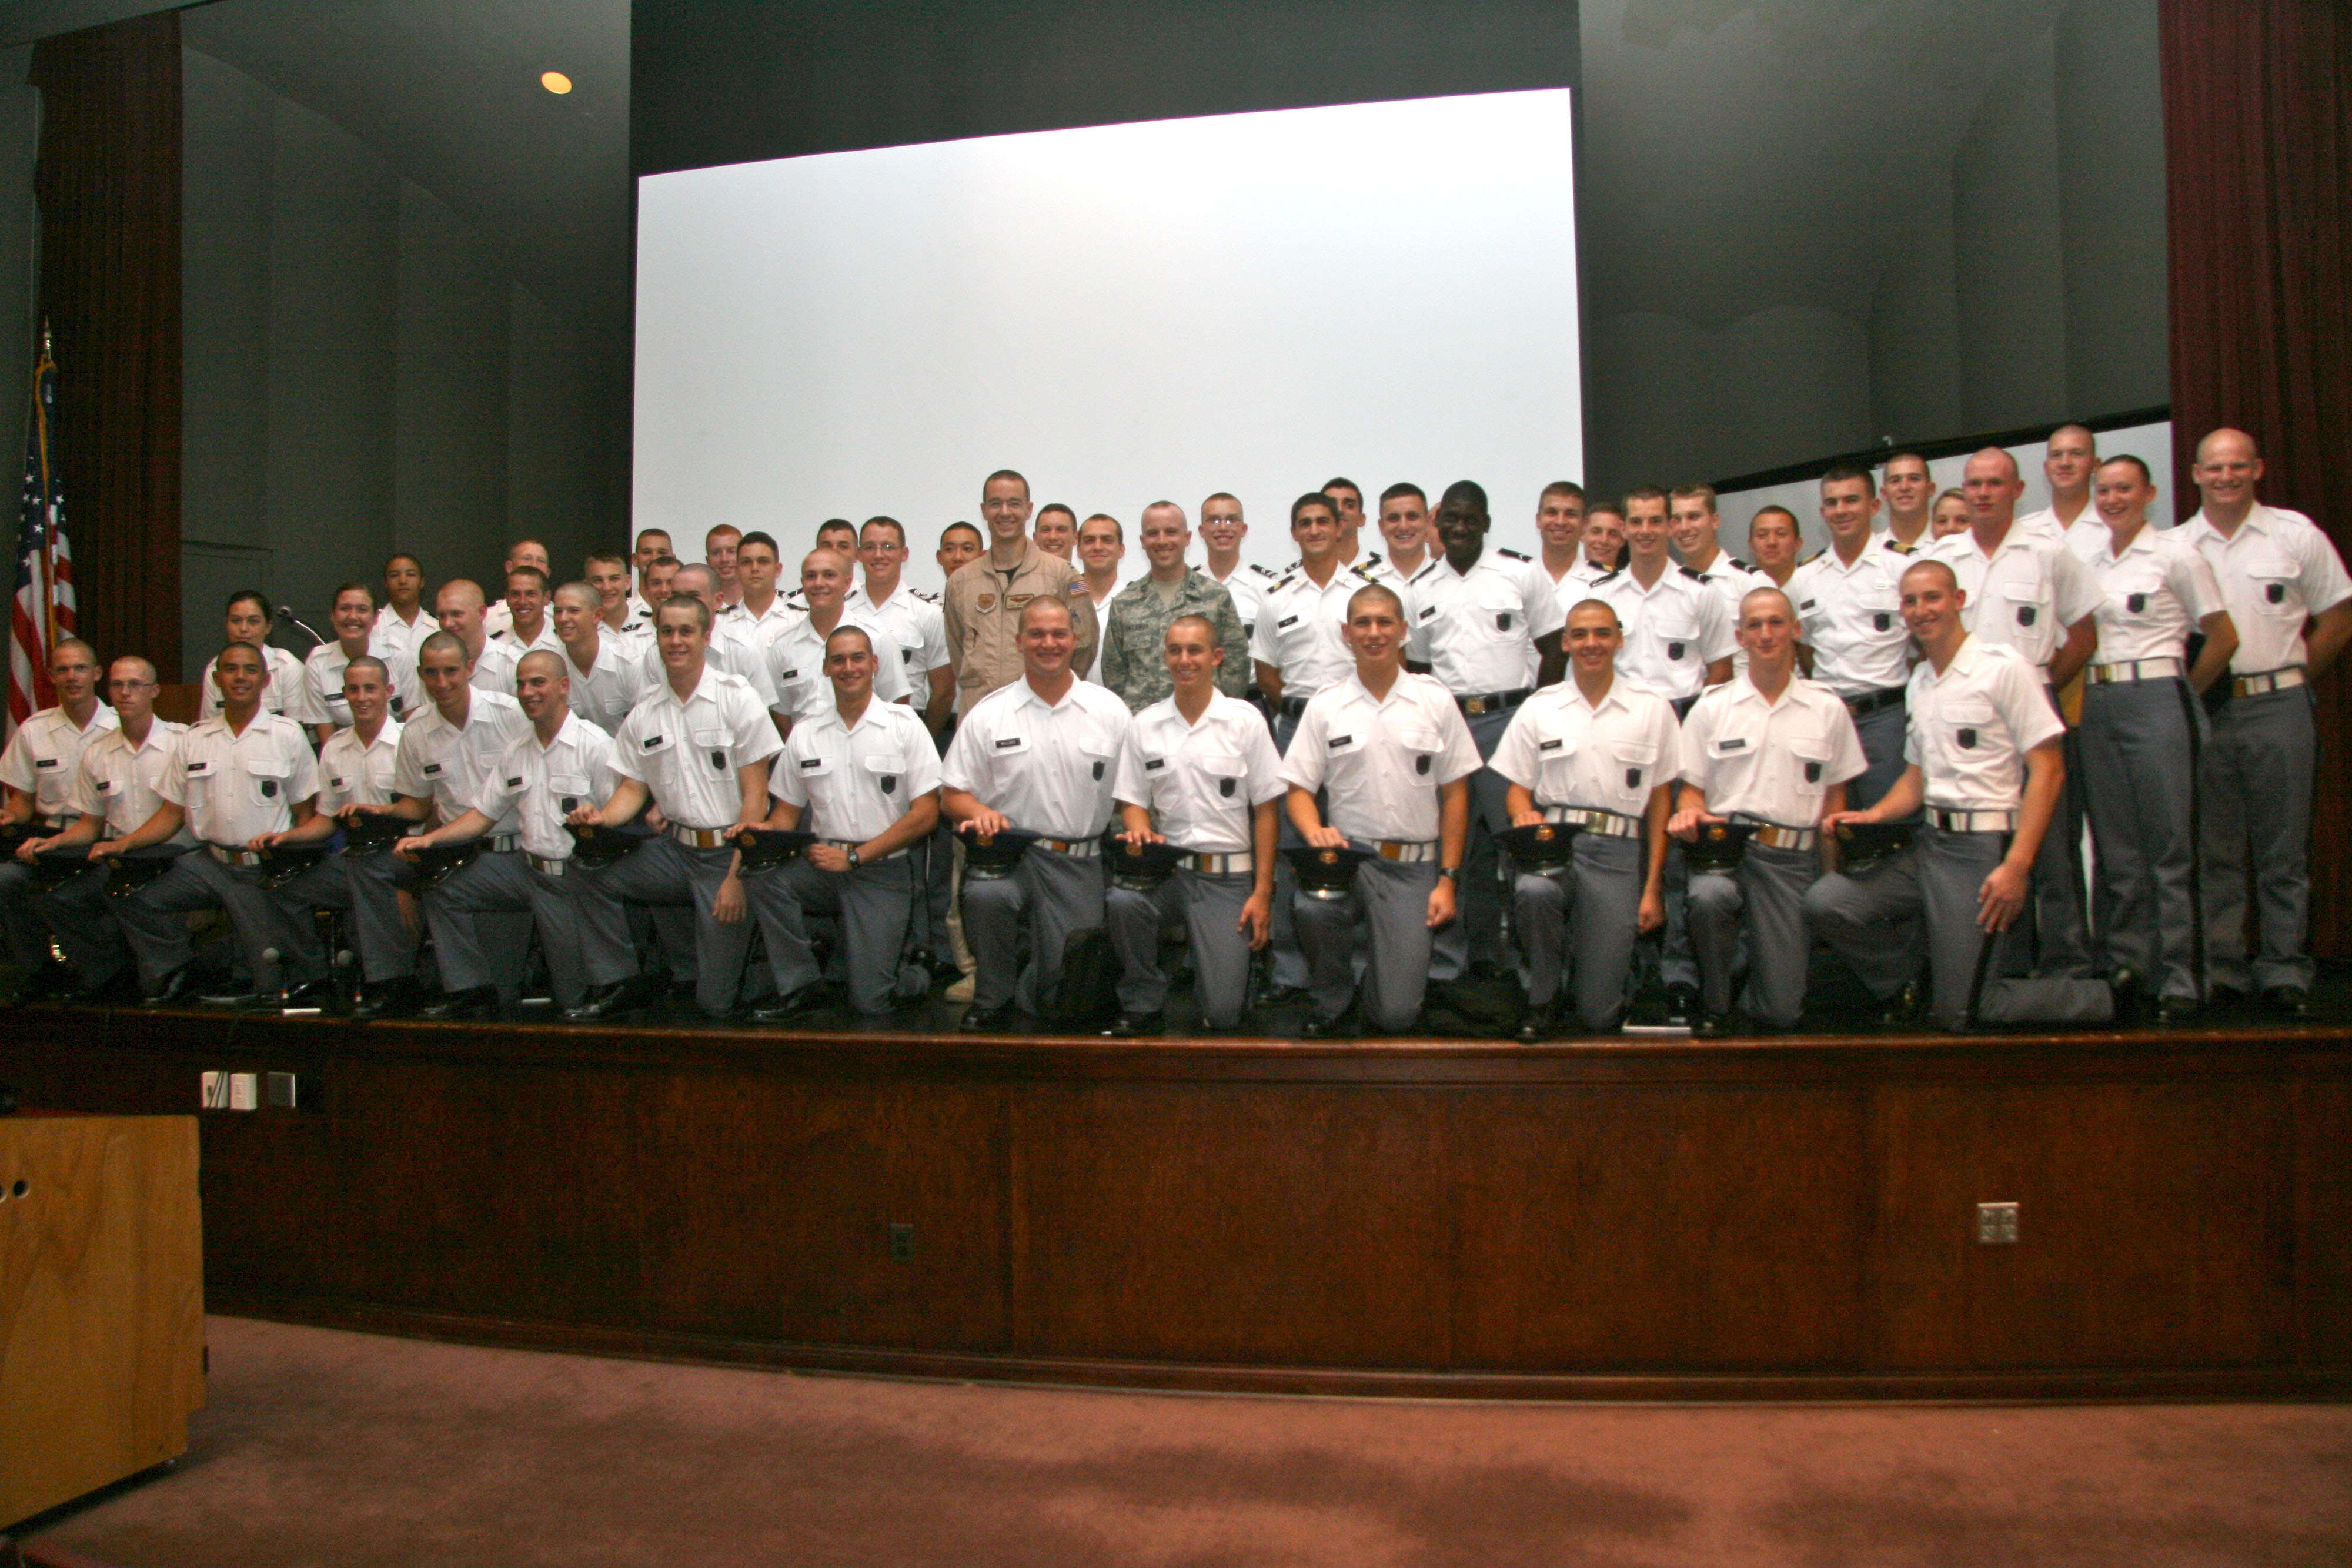 Capt. Dan Richardson (center, left), U.S. Air Force and Capt. Chris Callaway (center, right), U.S. Air Force, previous Gunfighter panelists standing on stage with members of their former cadet company. Echo Company